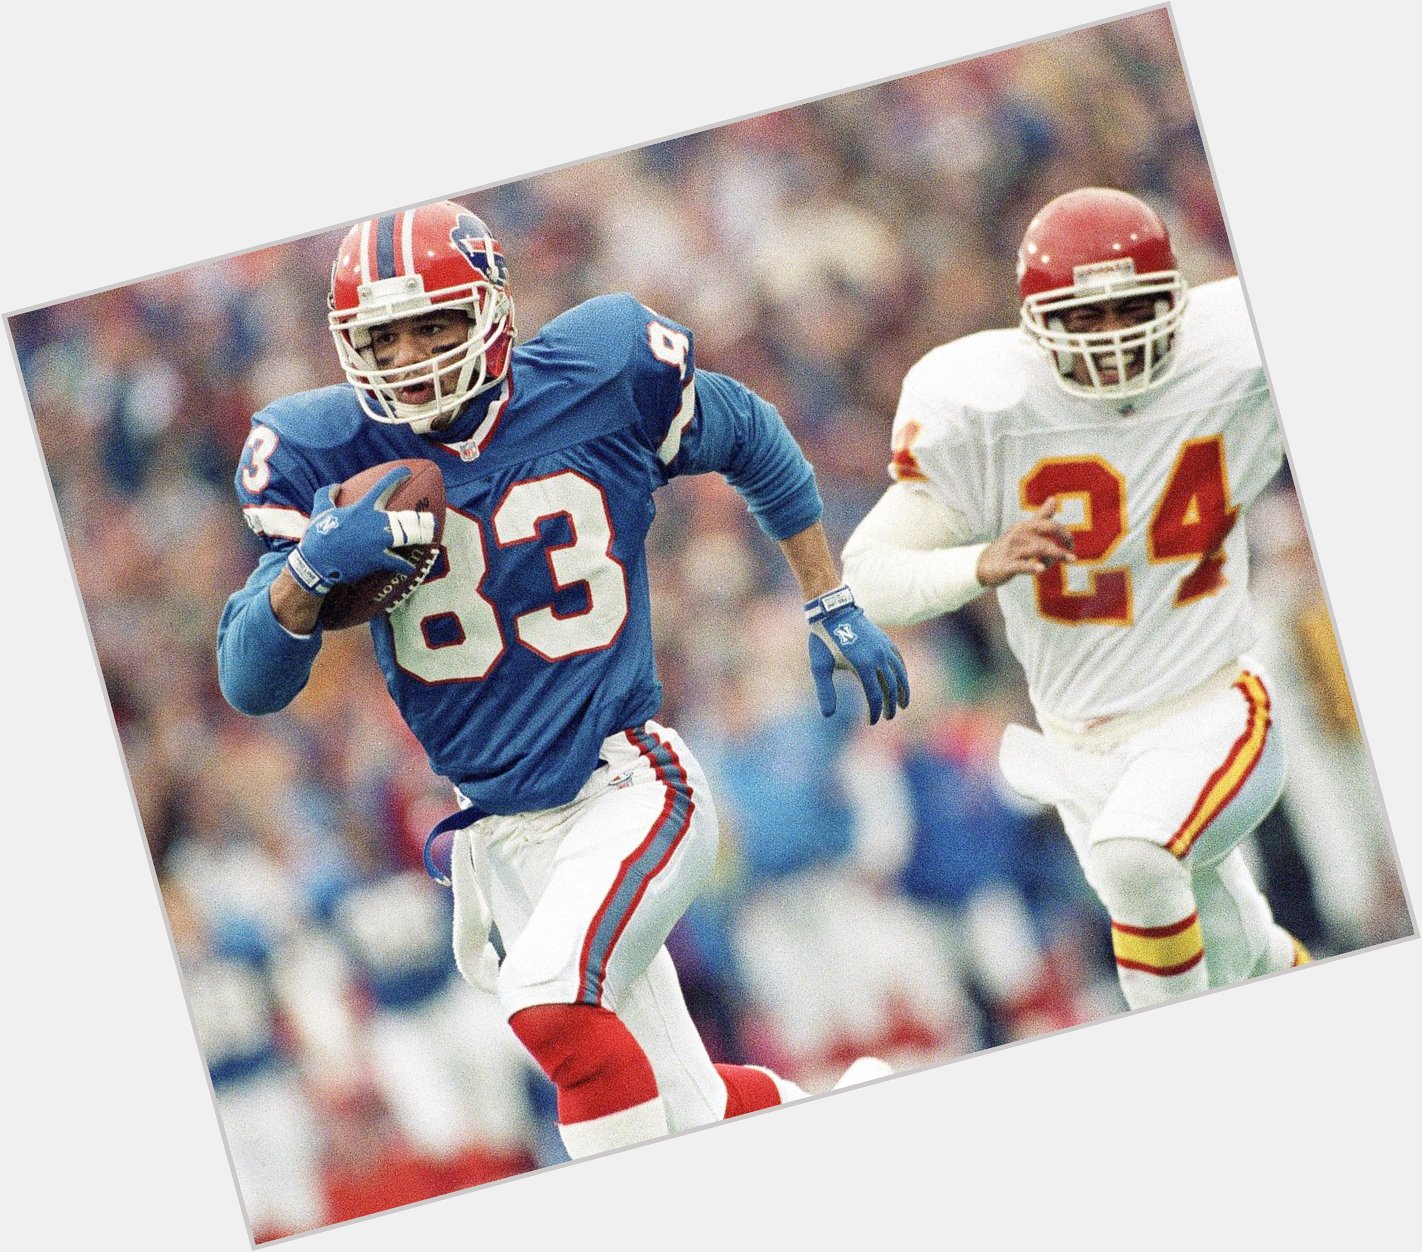 Happy Birthday to Andre Reed, who turns 51 today! 